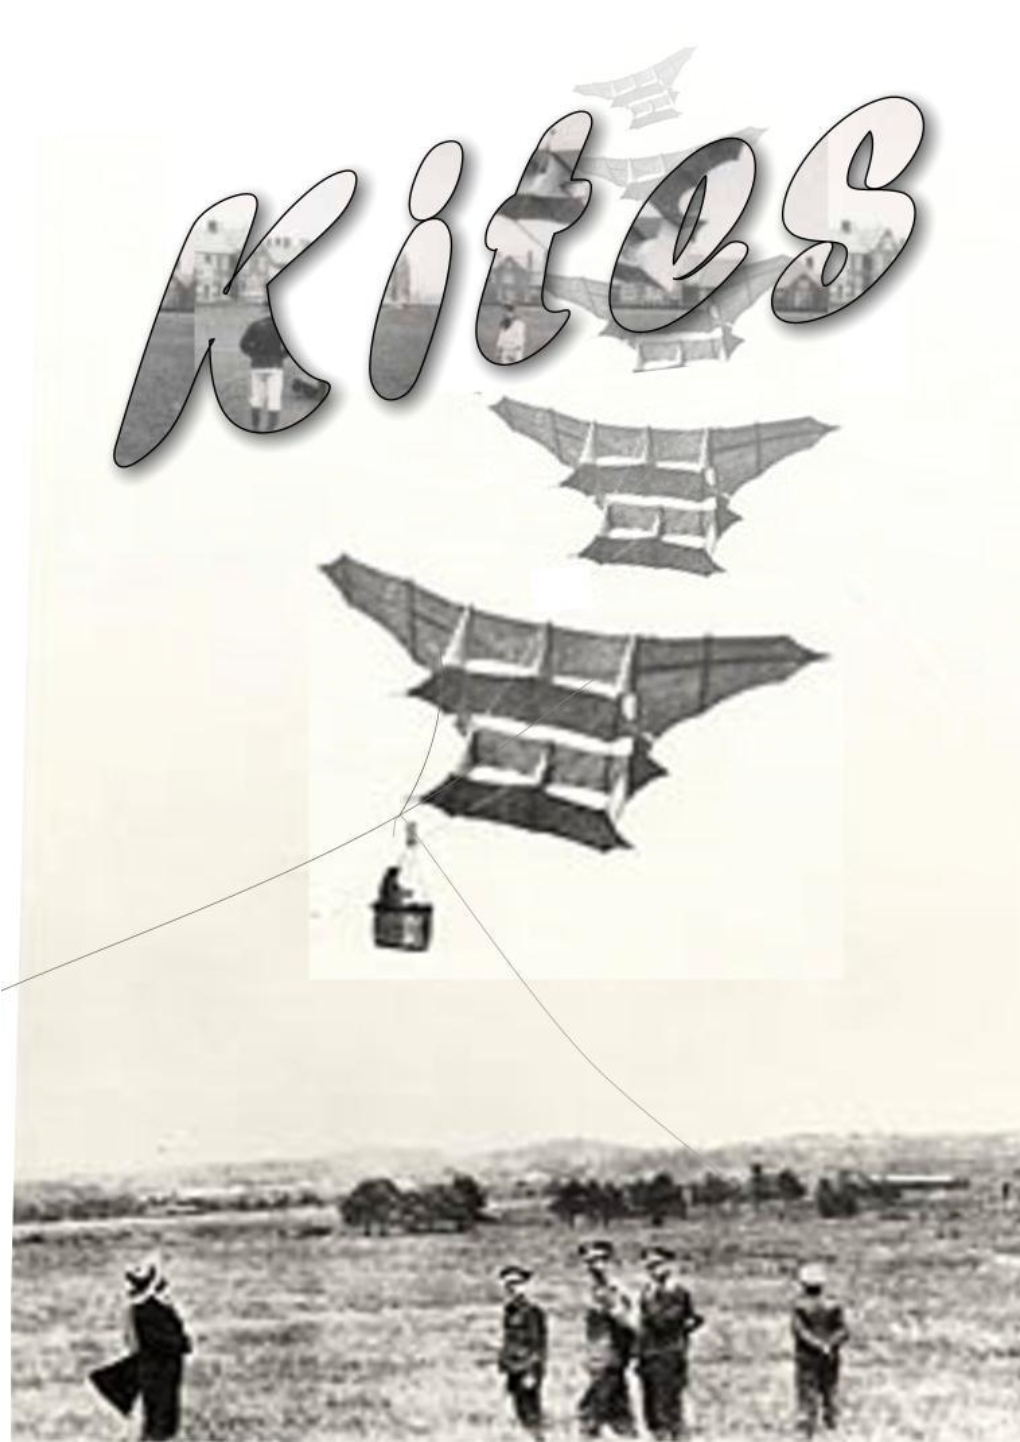 Kite Flying Is Economical, Tough and Has Half the Stretch of Nylon Lines